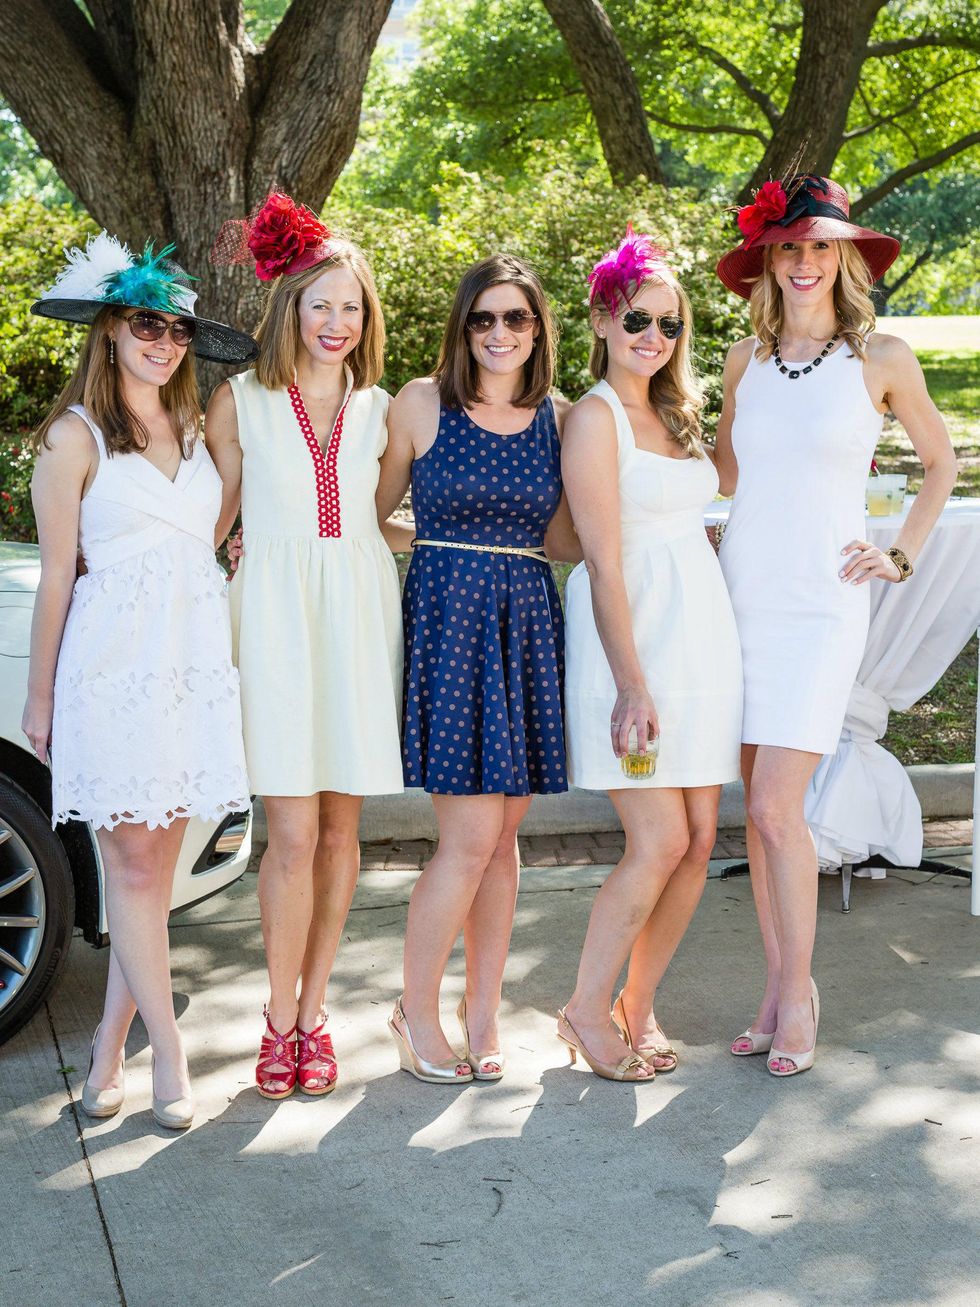 Shelle Wolters, Allison Edwards, Karen Ribar, Jane Marie Jones, Kathryn Moore, Day at the Races